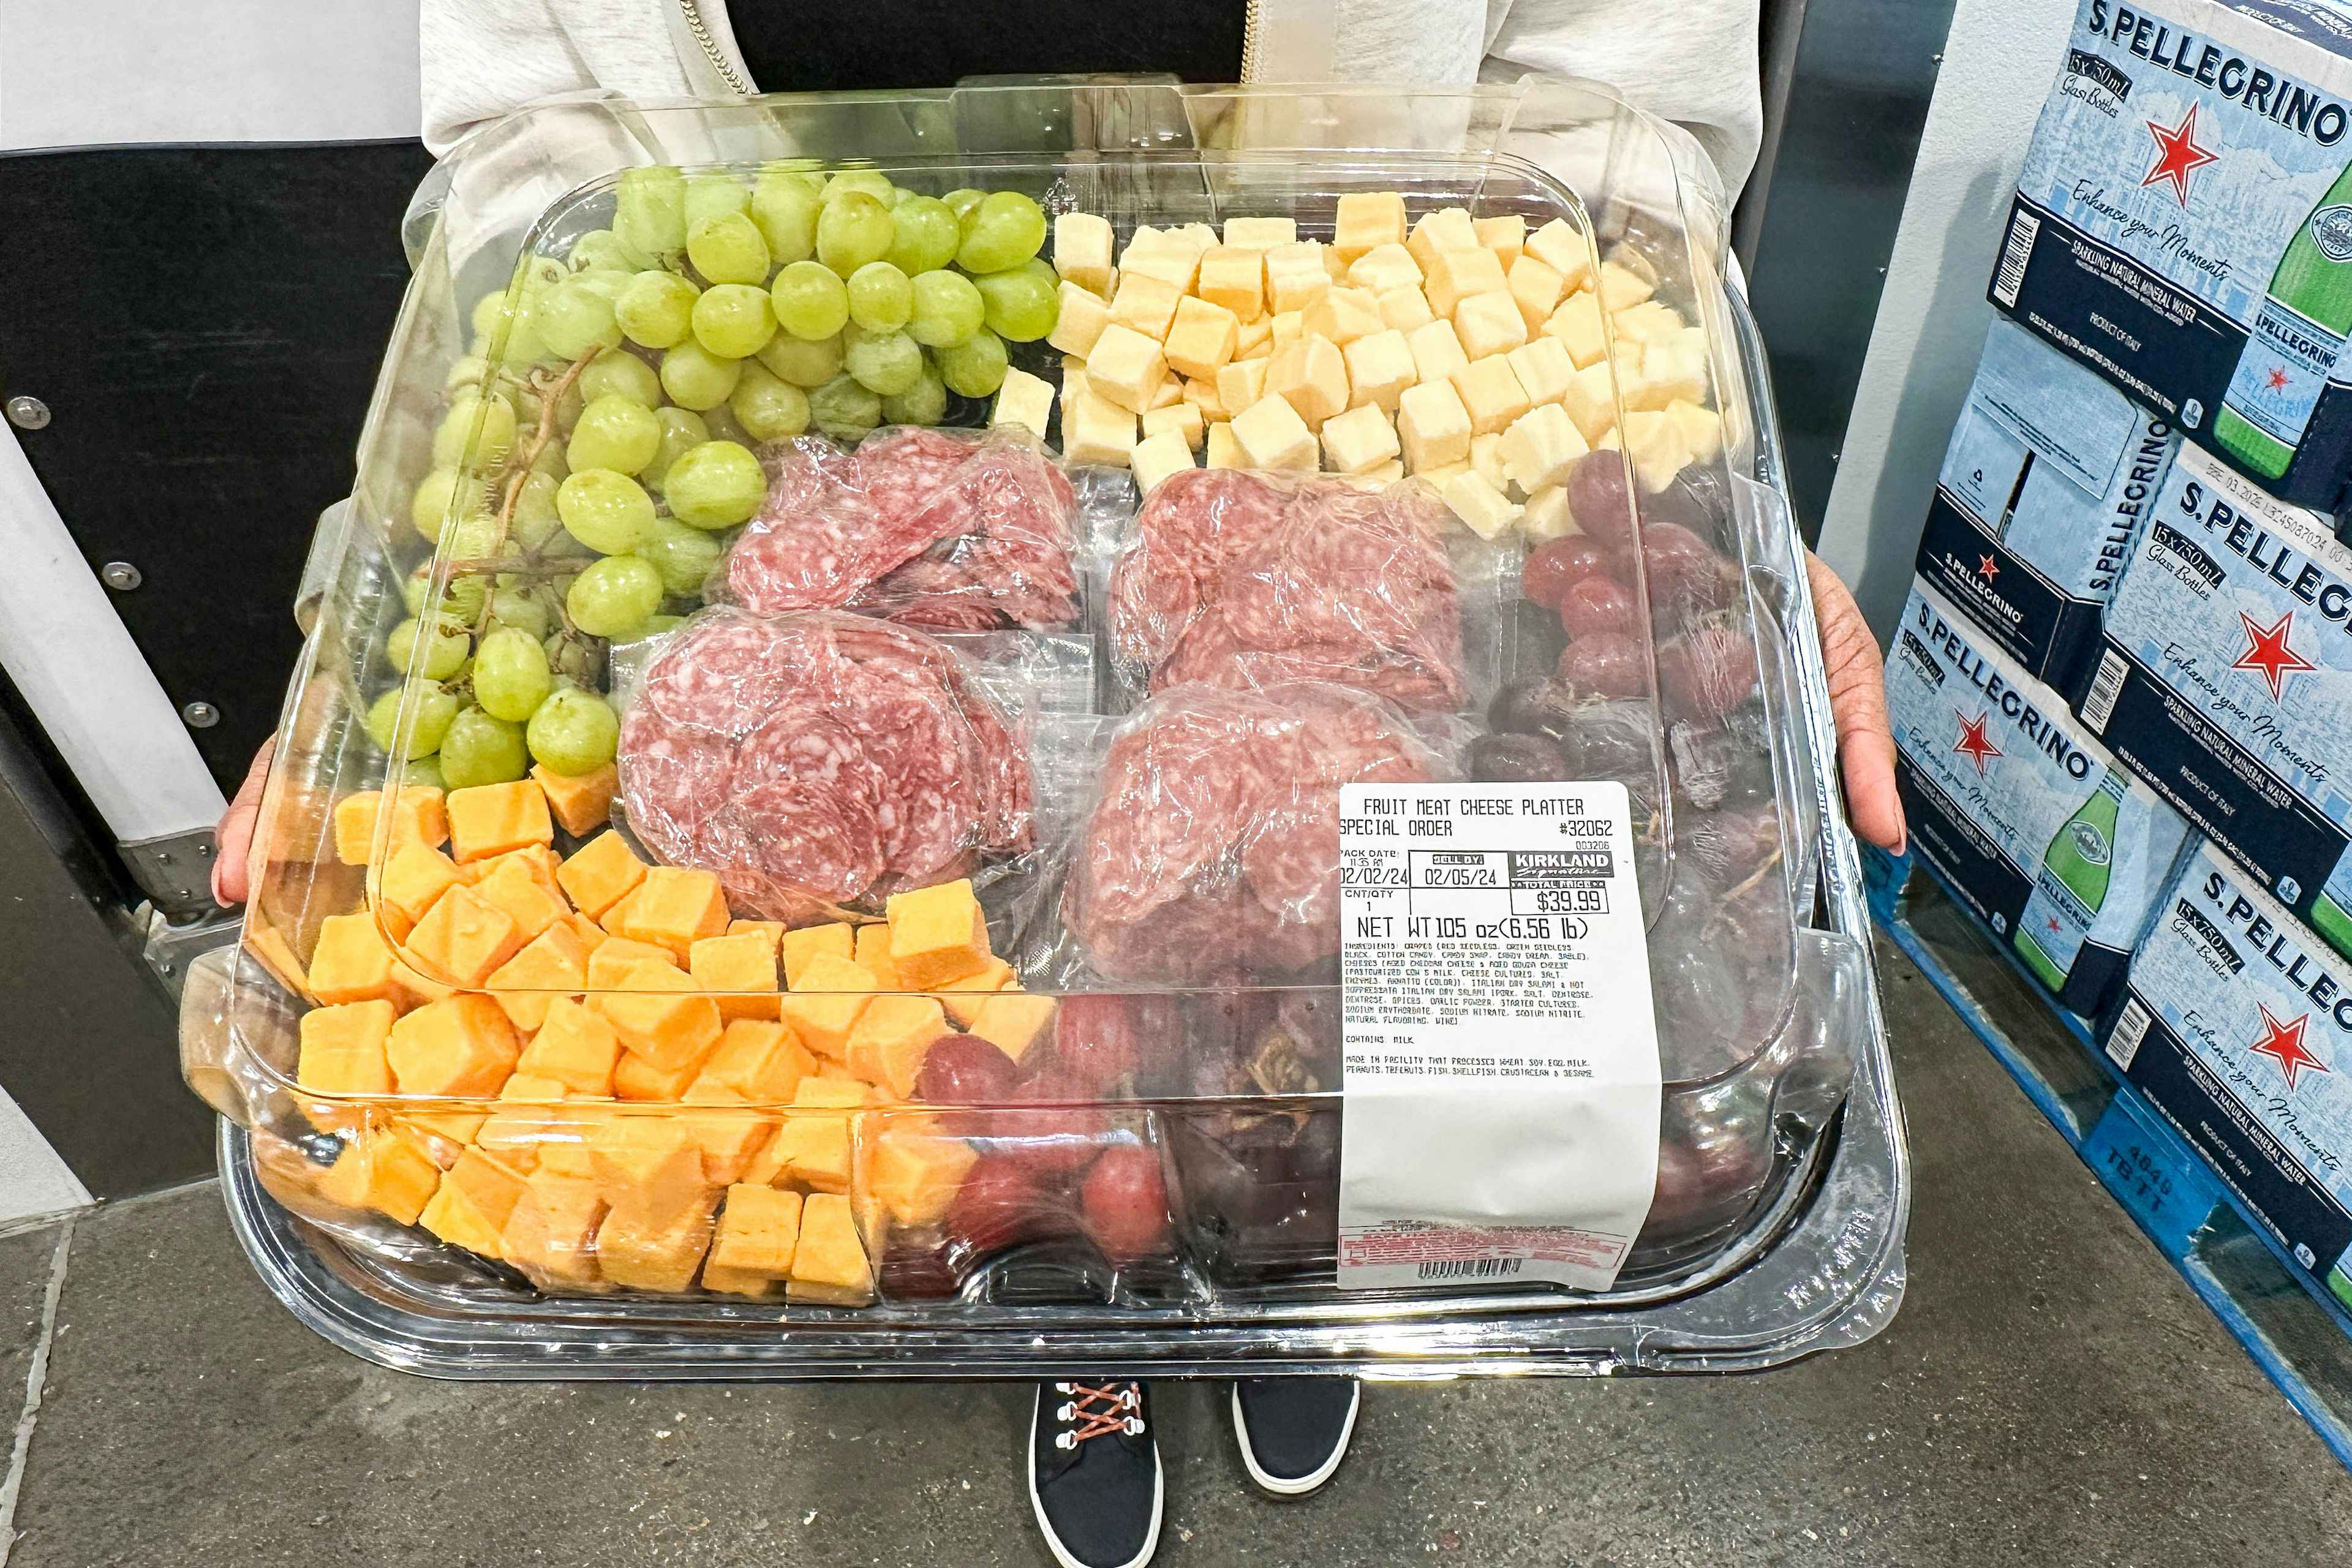 costco-catering-party-platter-fruit-meat-cheese-kcl-model-4